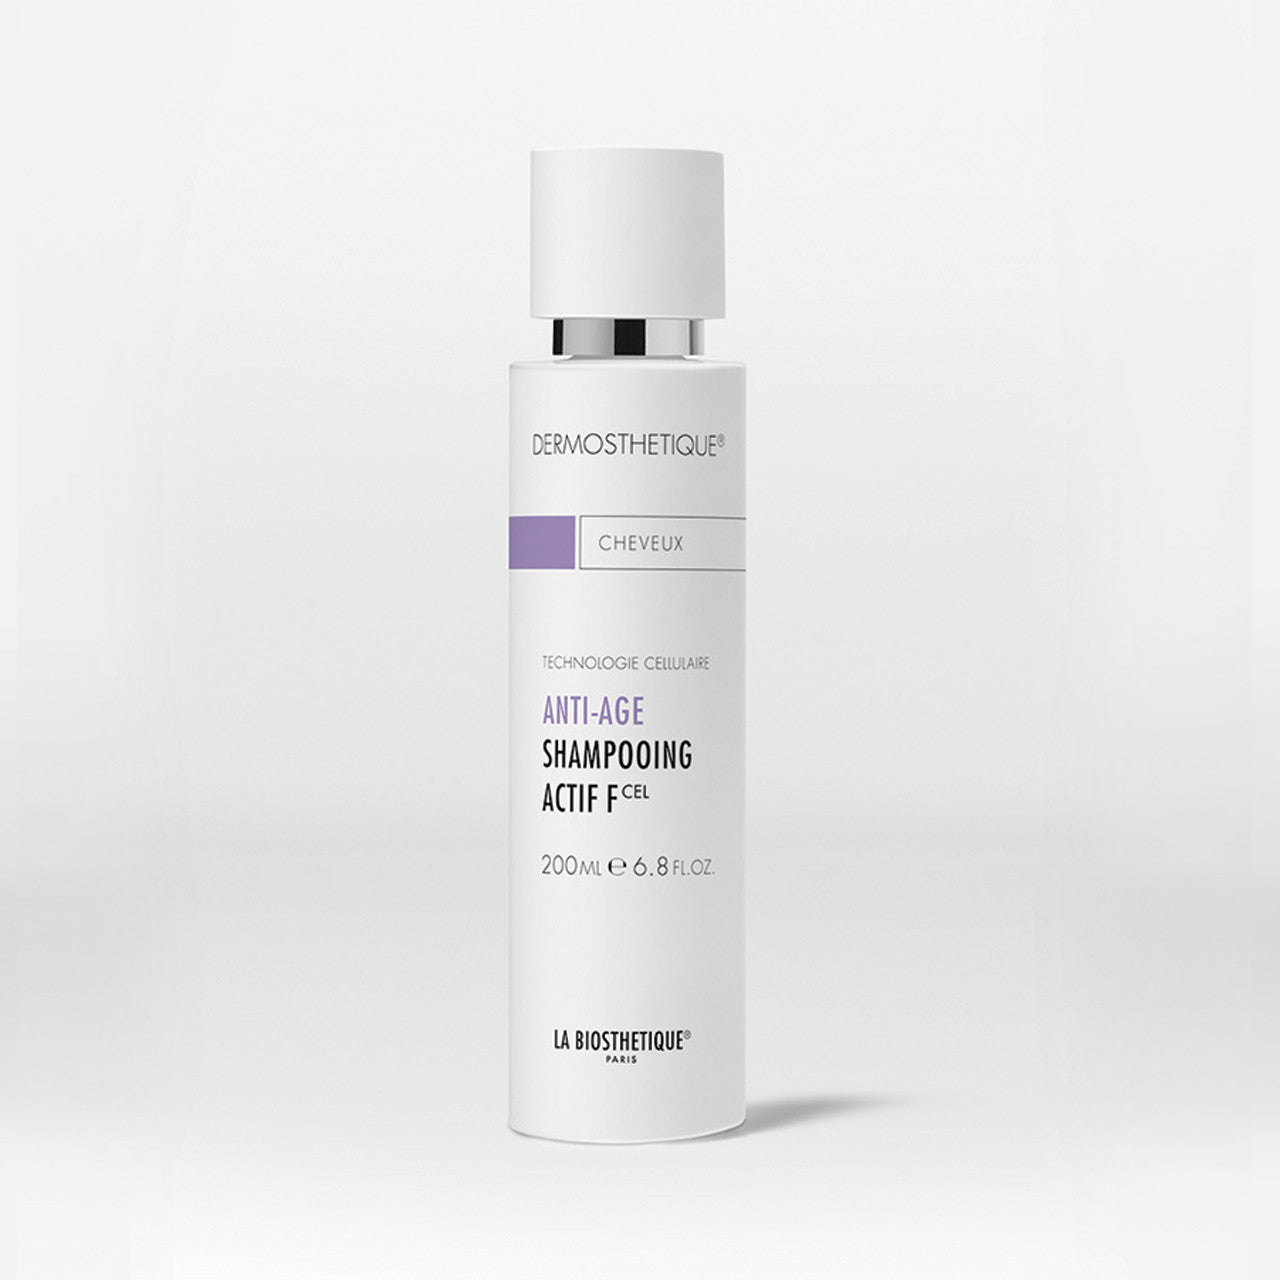 La Biosthetique's Anti-Age - Shampooing Actif is for younger, fuller hair with shine and bounce.